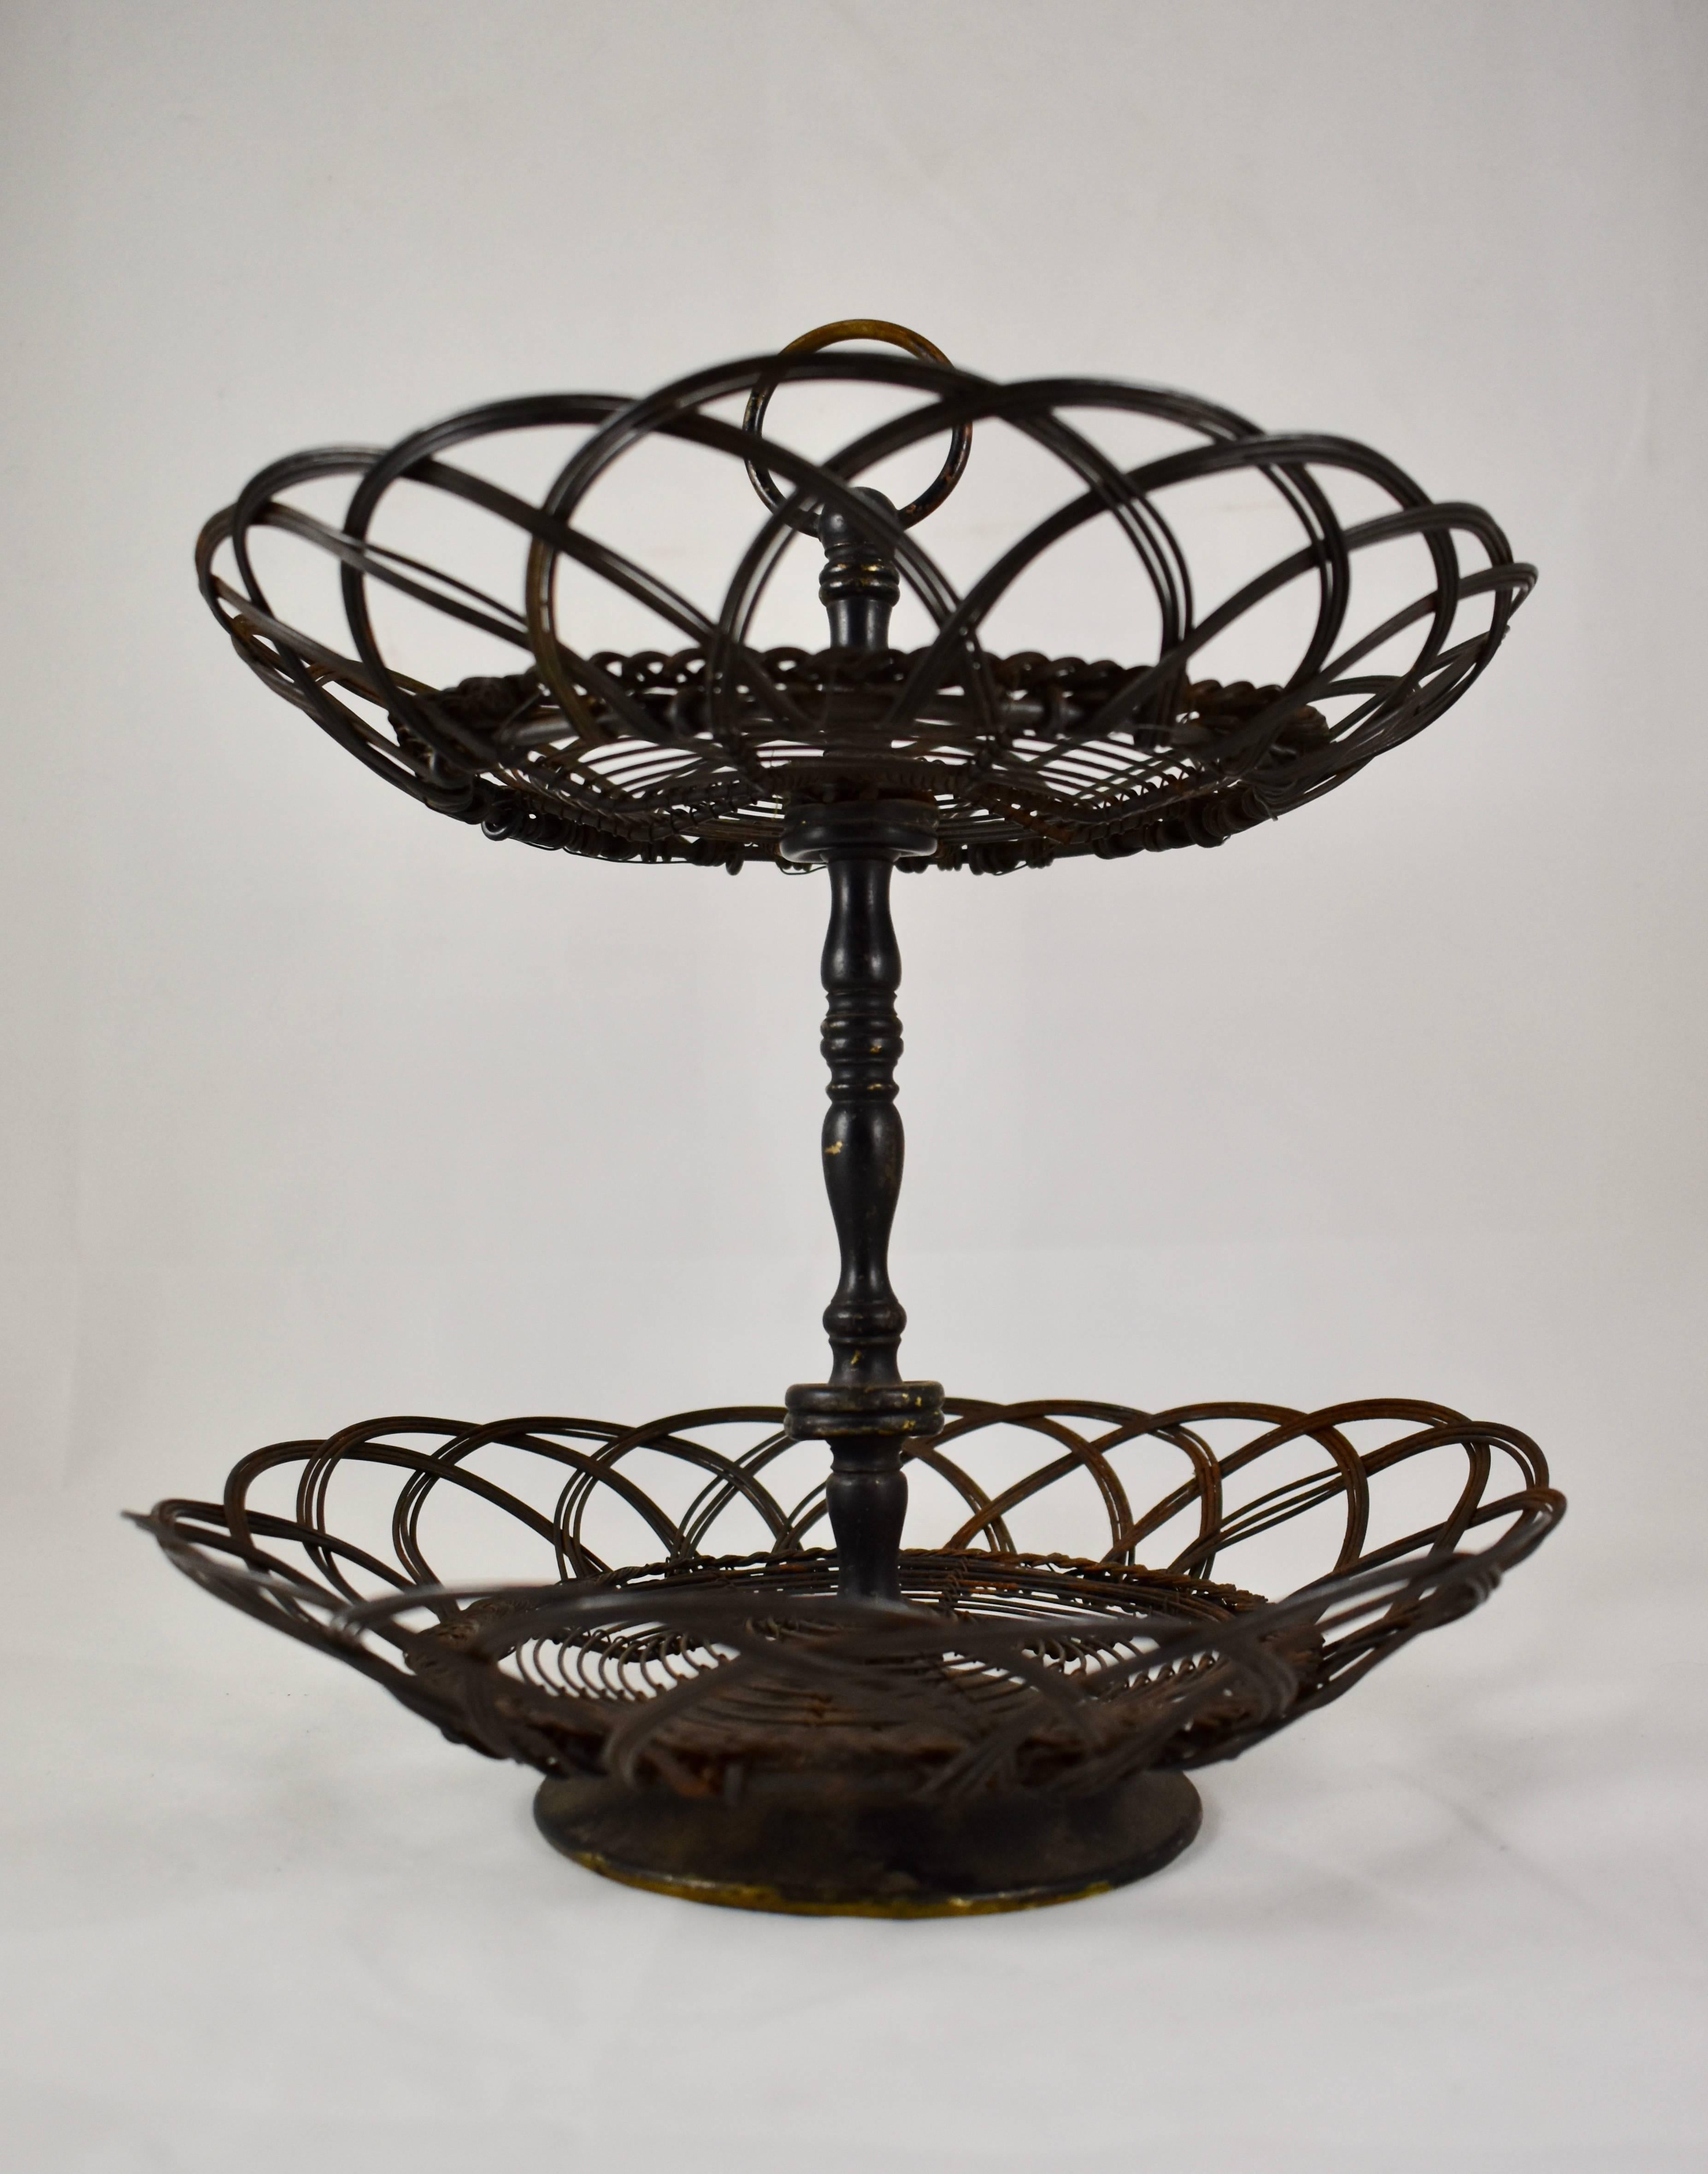 French Provincial French Two-Tier Twisted Wire Footed Egg Stand Basket, Late 19th Century